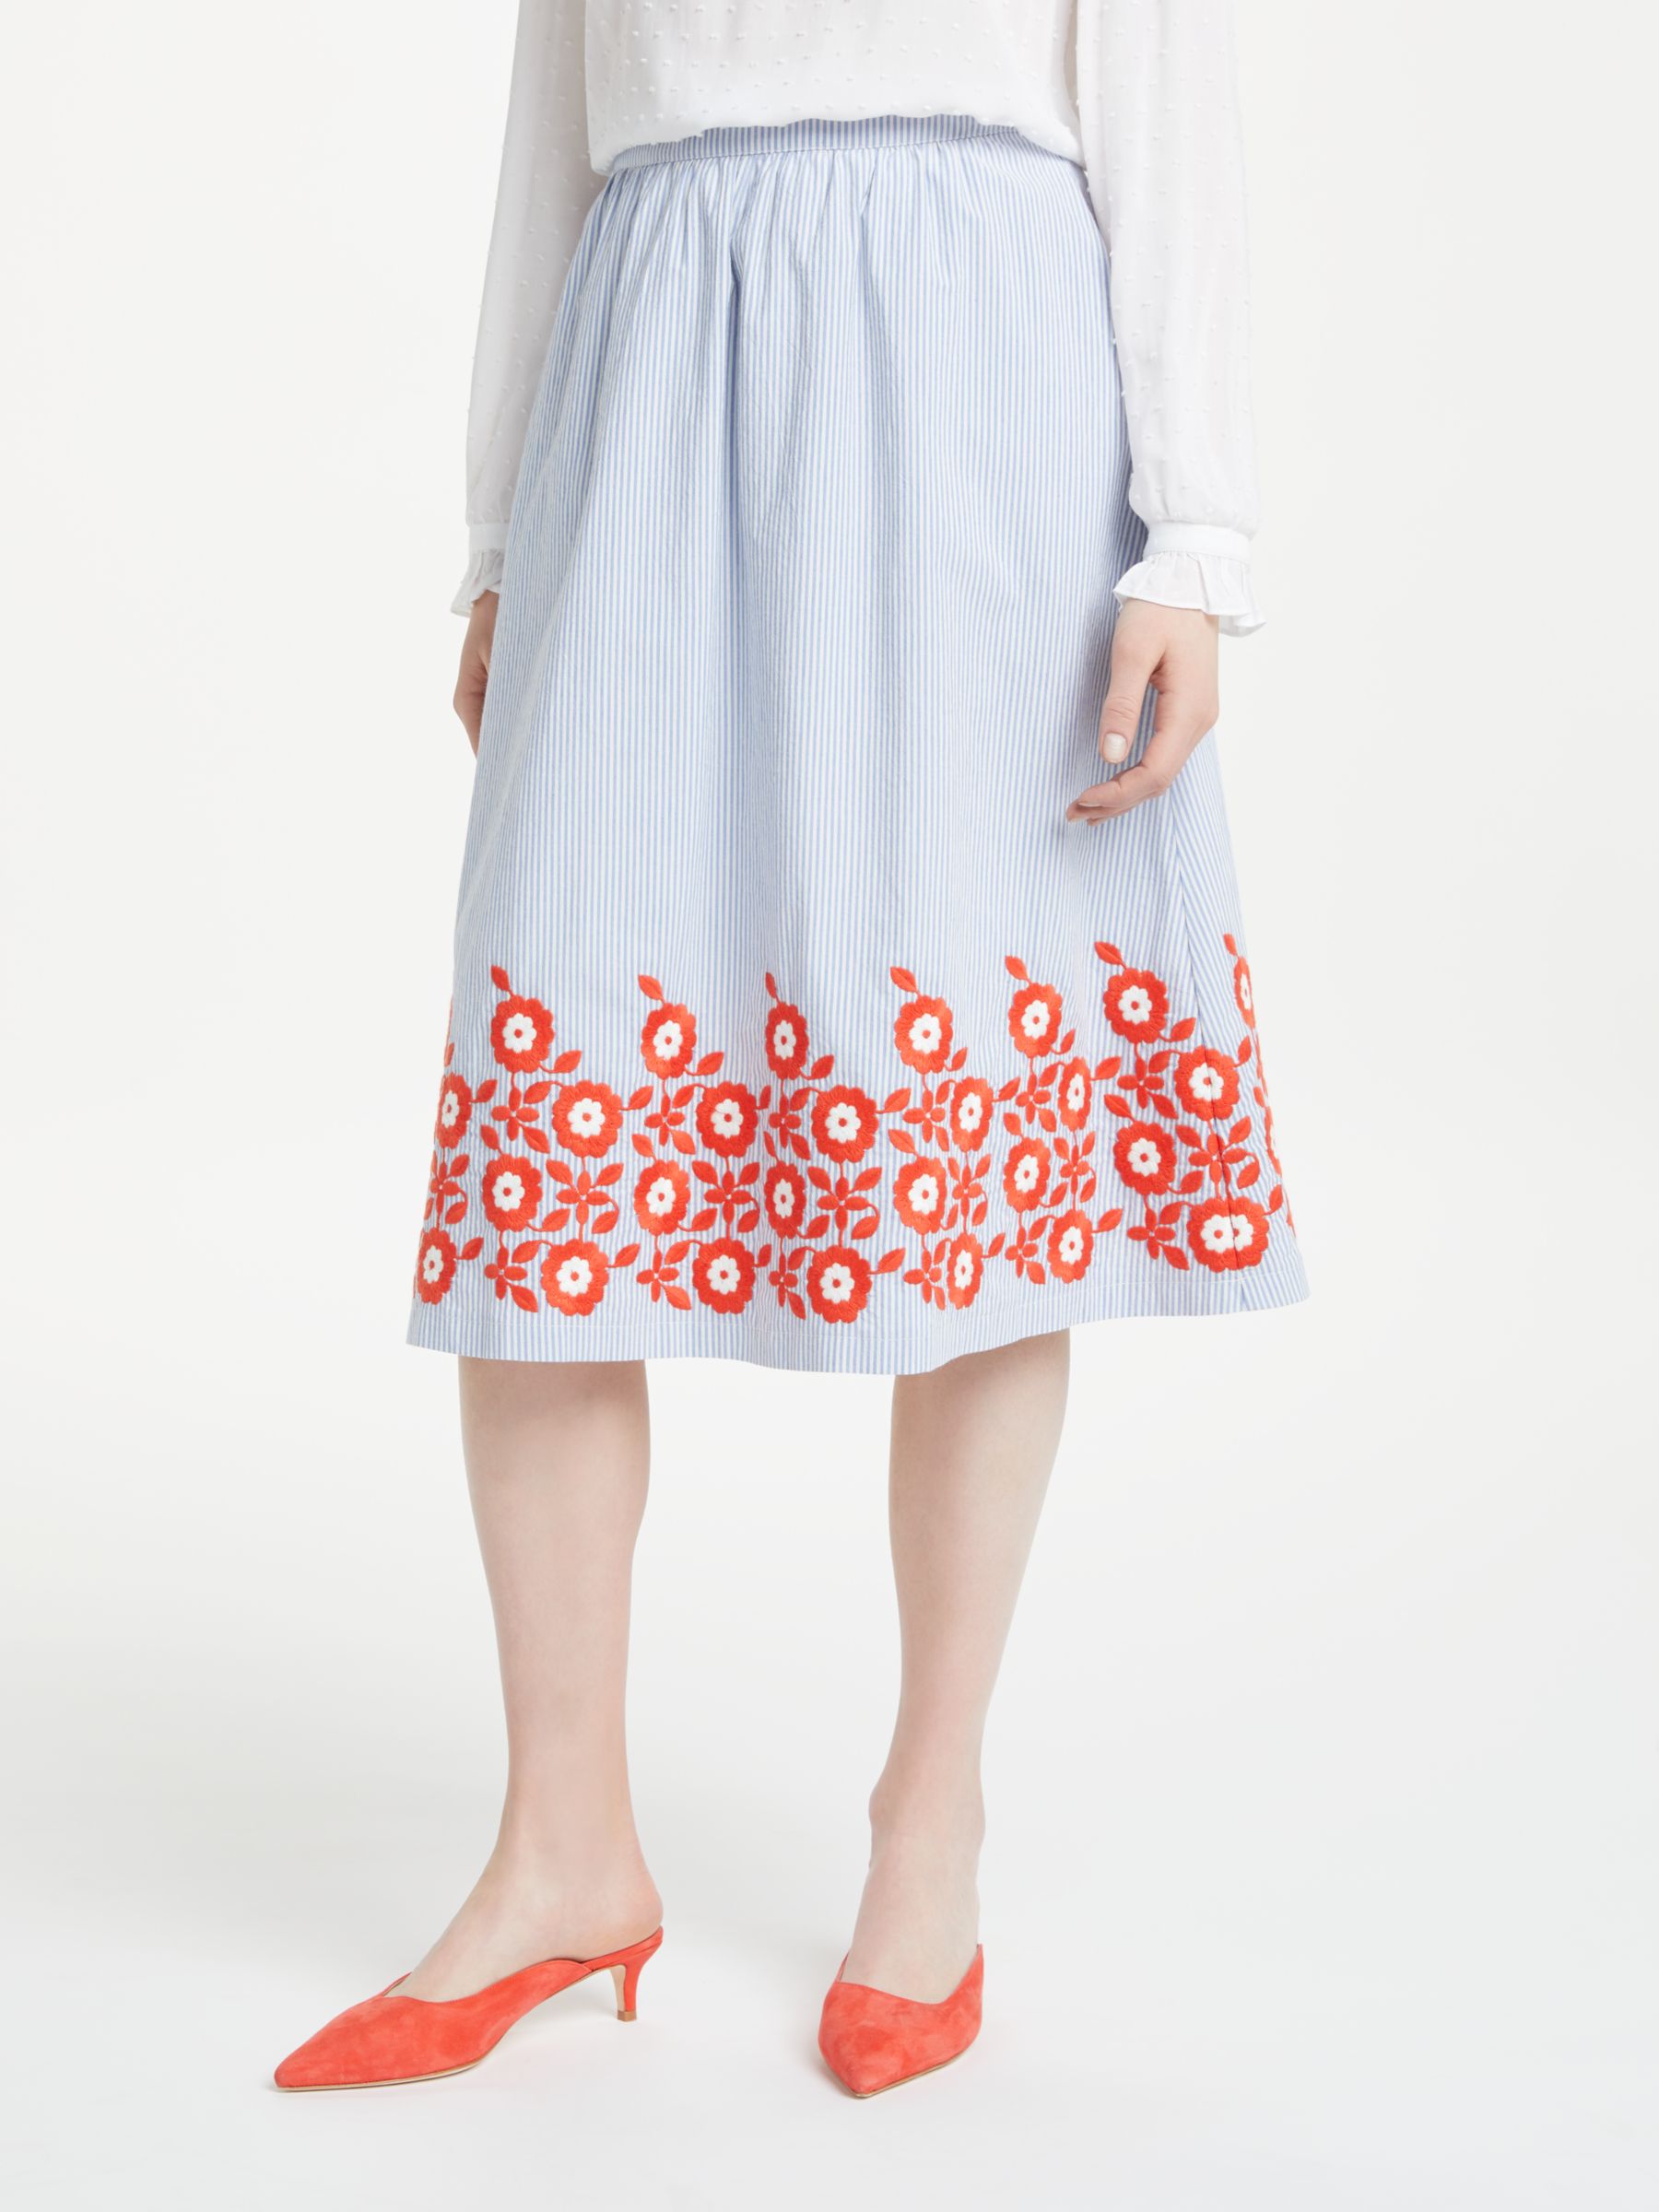 Boden Haidee Embroidered Skirt